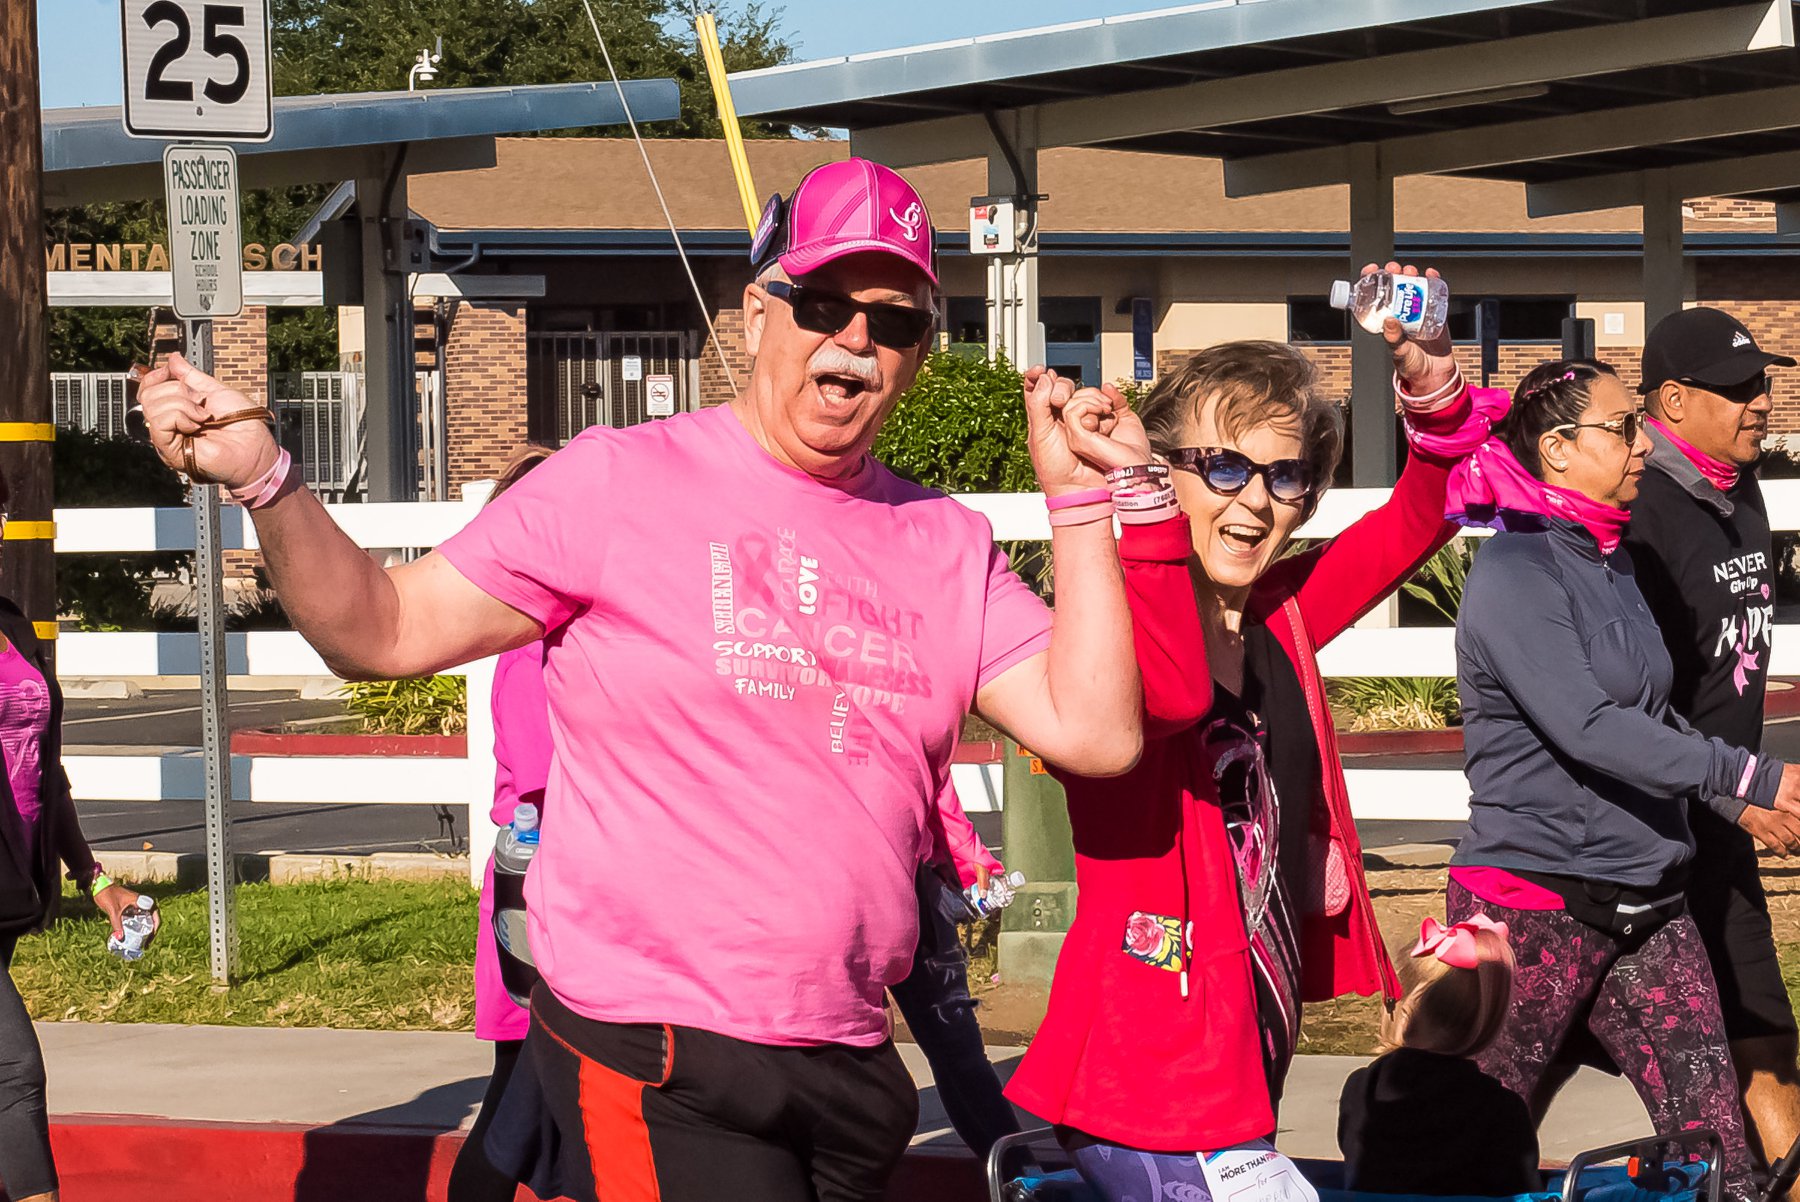 Susan G Komen Walking To End Breast Cancer In Motion Events